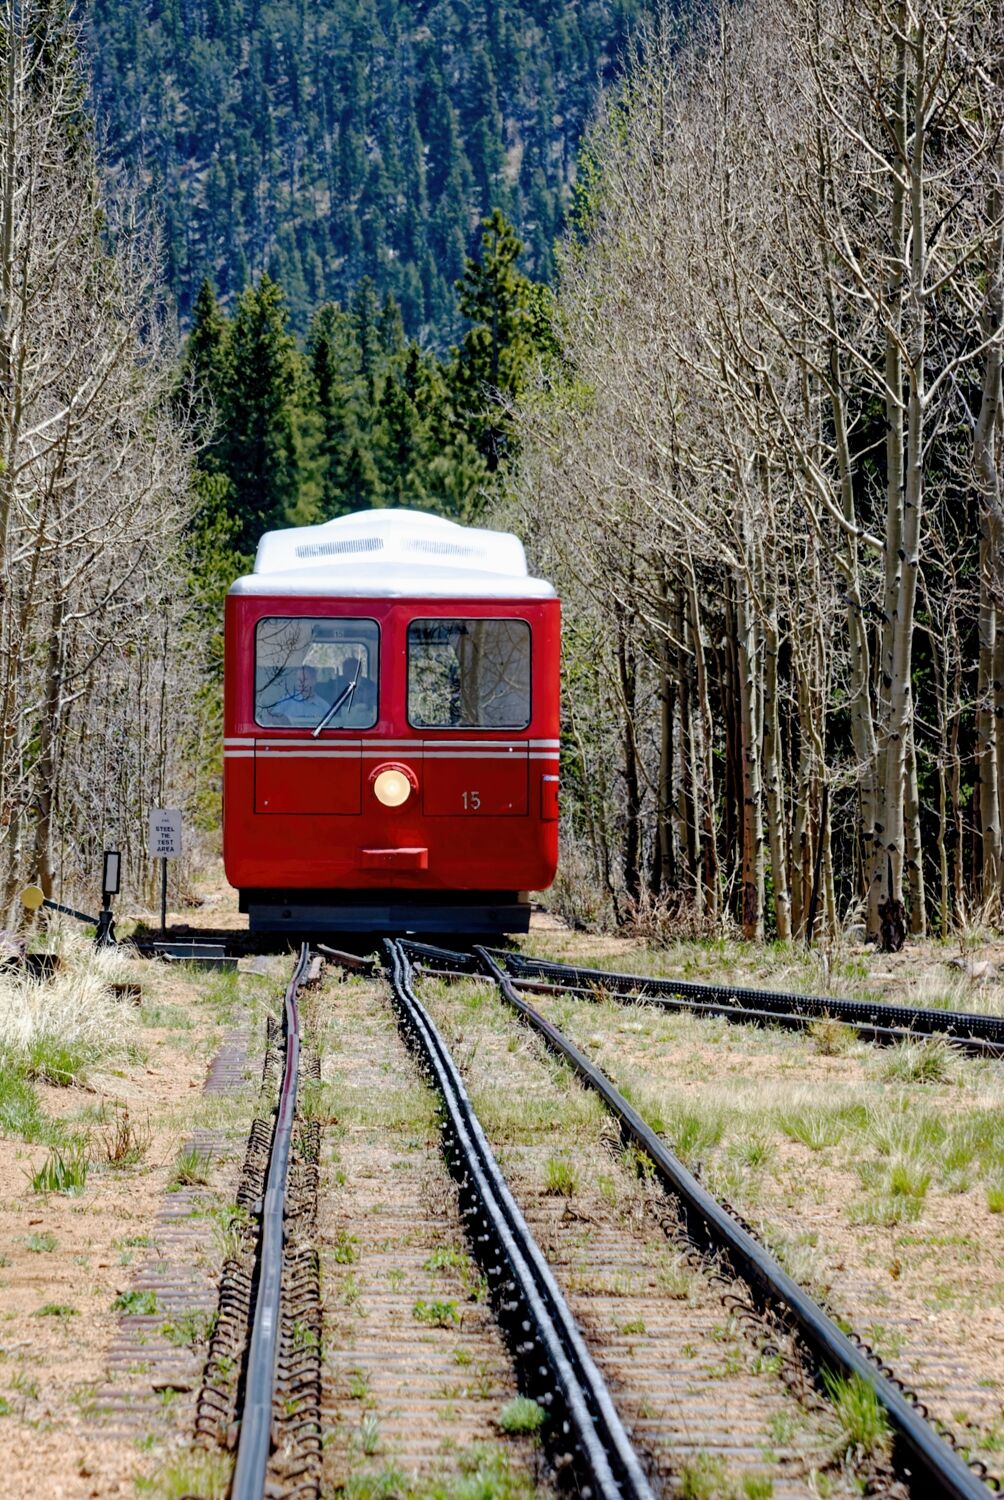 At the midway point on the Pikes Peak Cog Railway in Co.